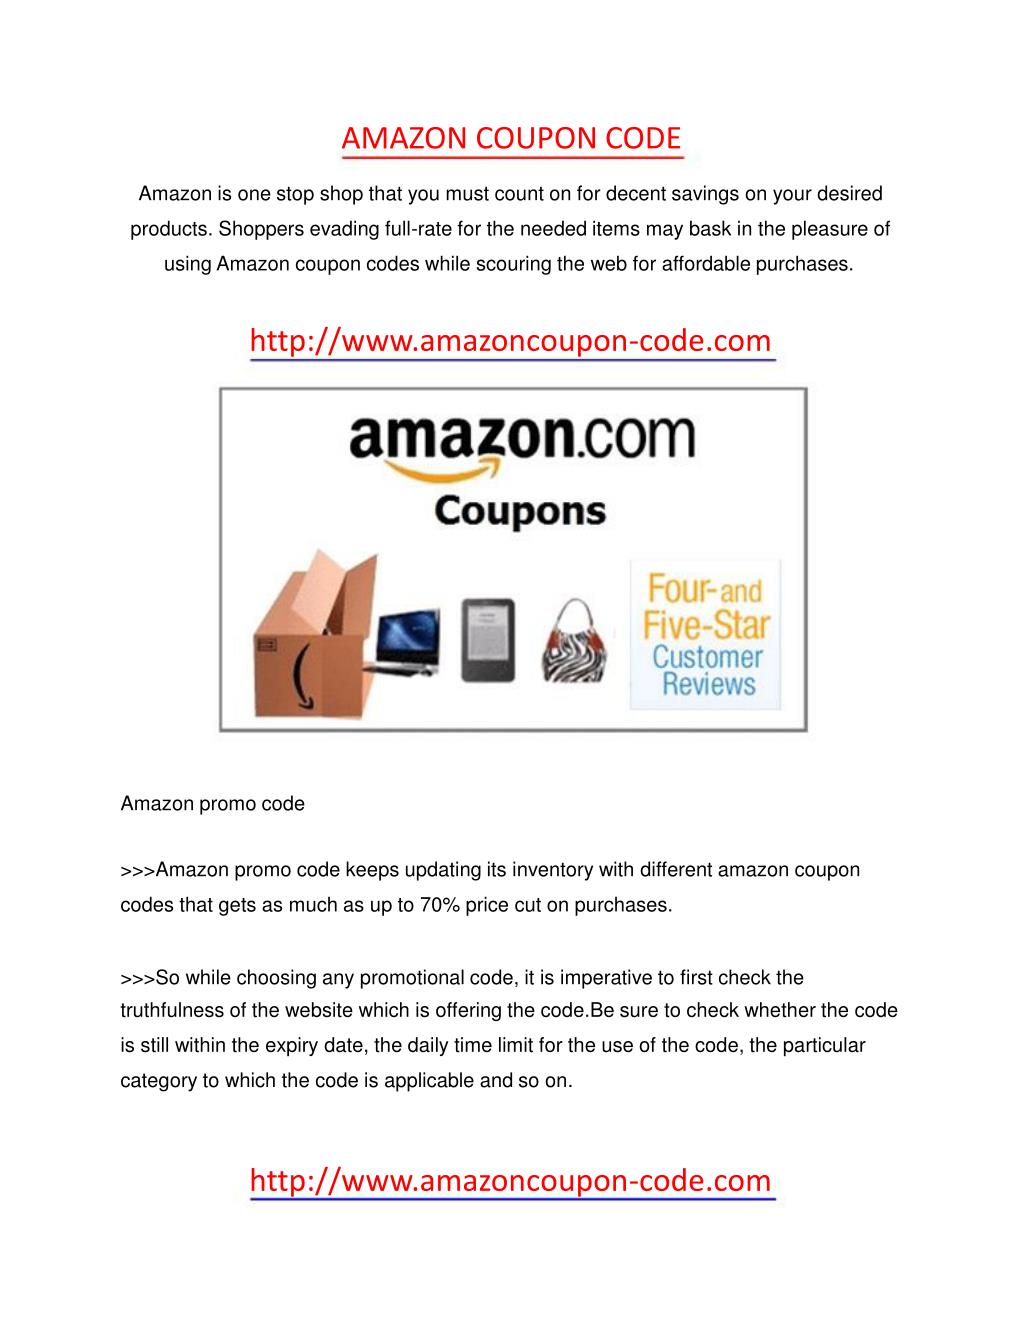 PPT amazon coupon code PowerPoint Presentation, free download ID160884